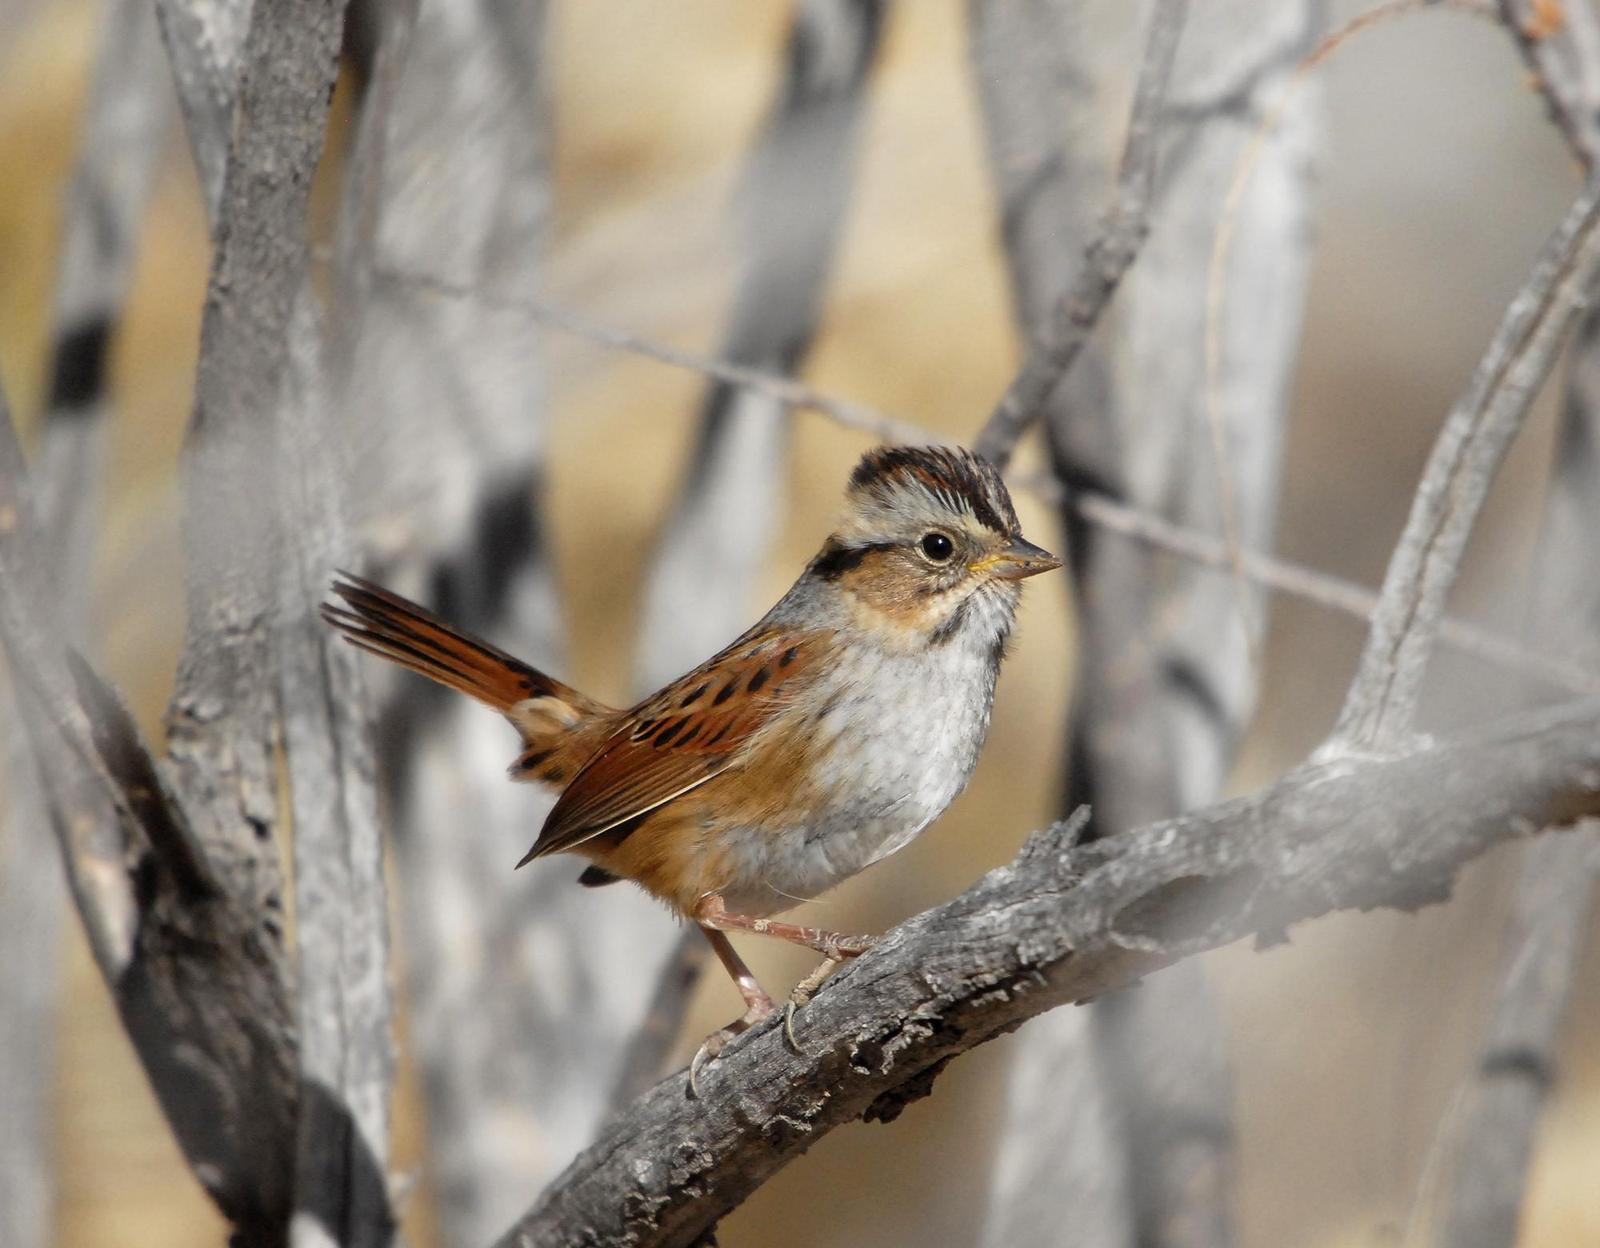 Swamp Sparrow Photo by Steven Mlodinow